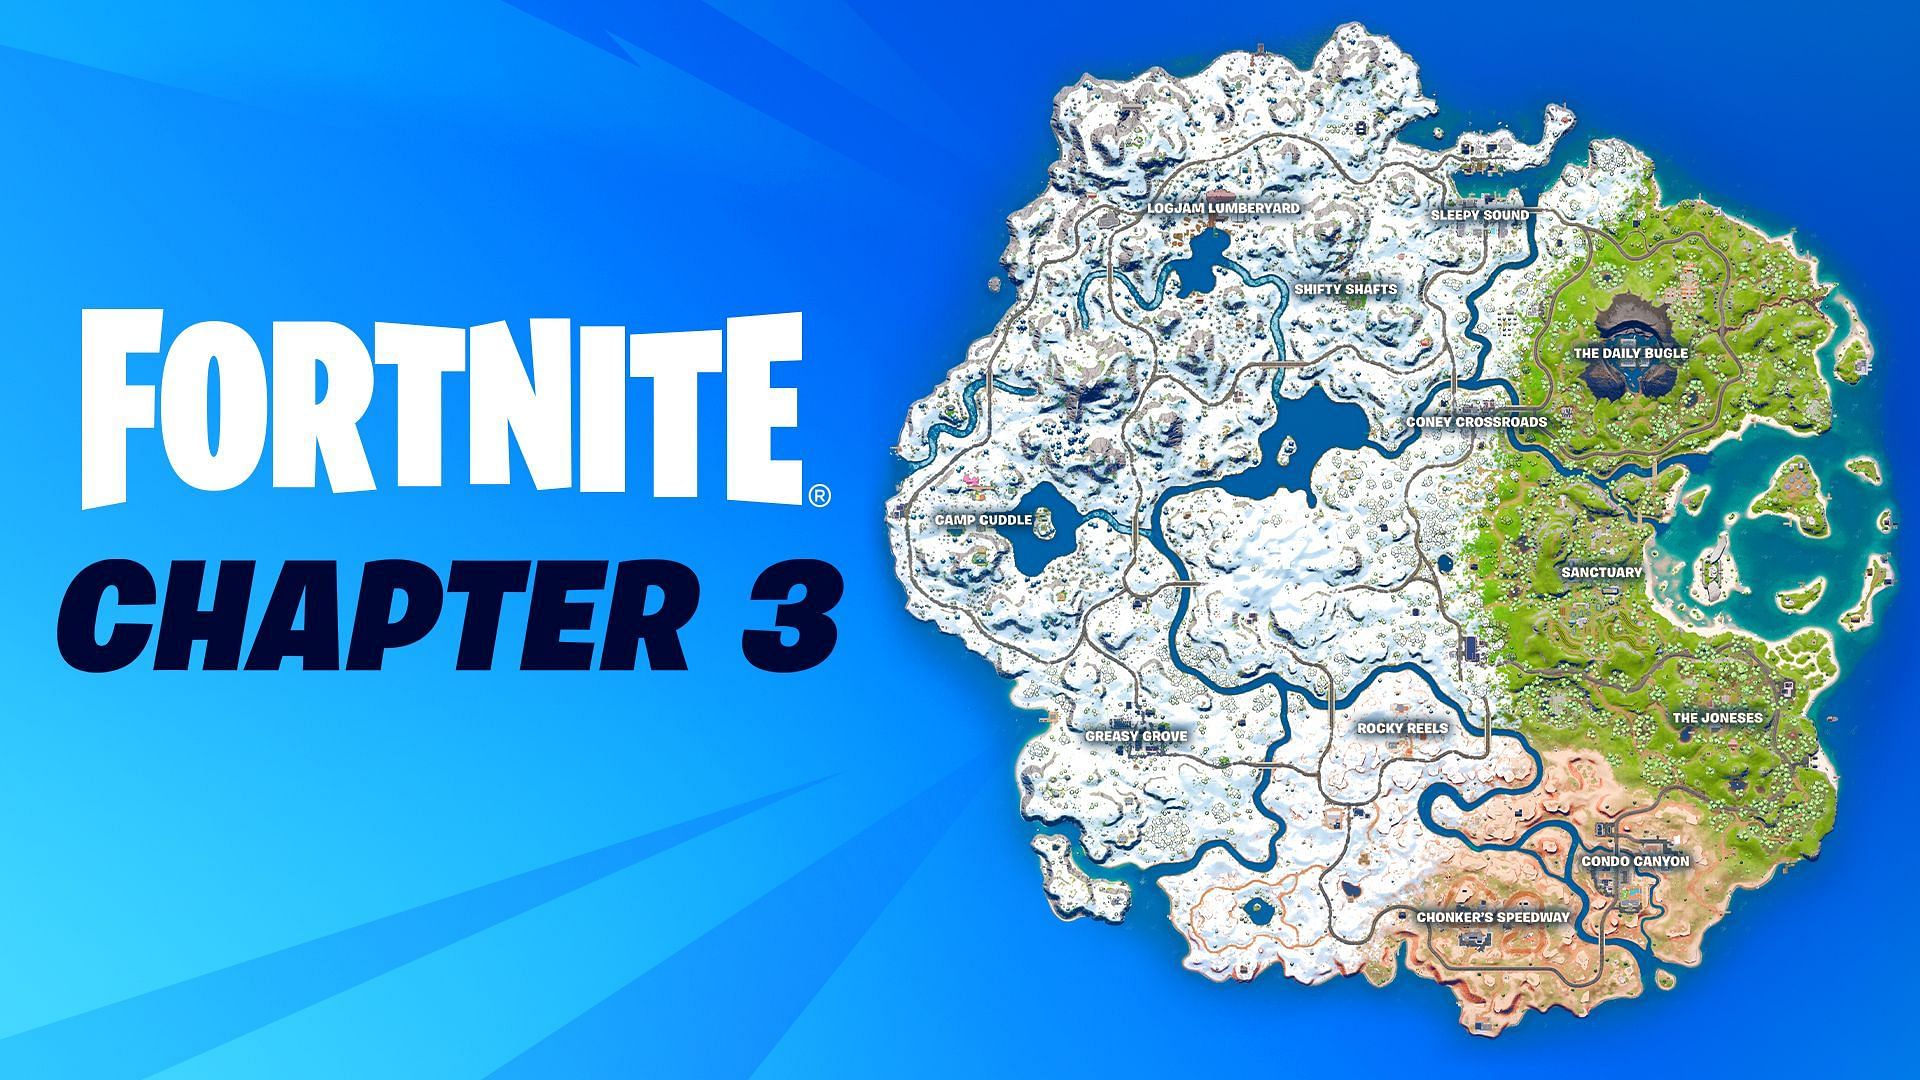 Plenty of map changes have altered the Chapter 3 map in Fortnite (Image via Epic Games)